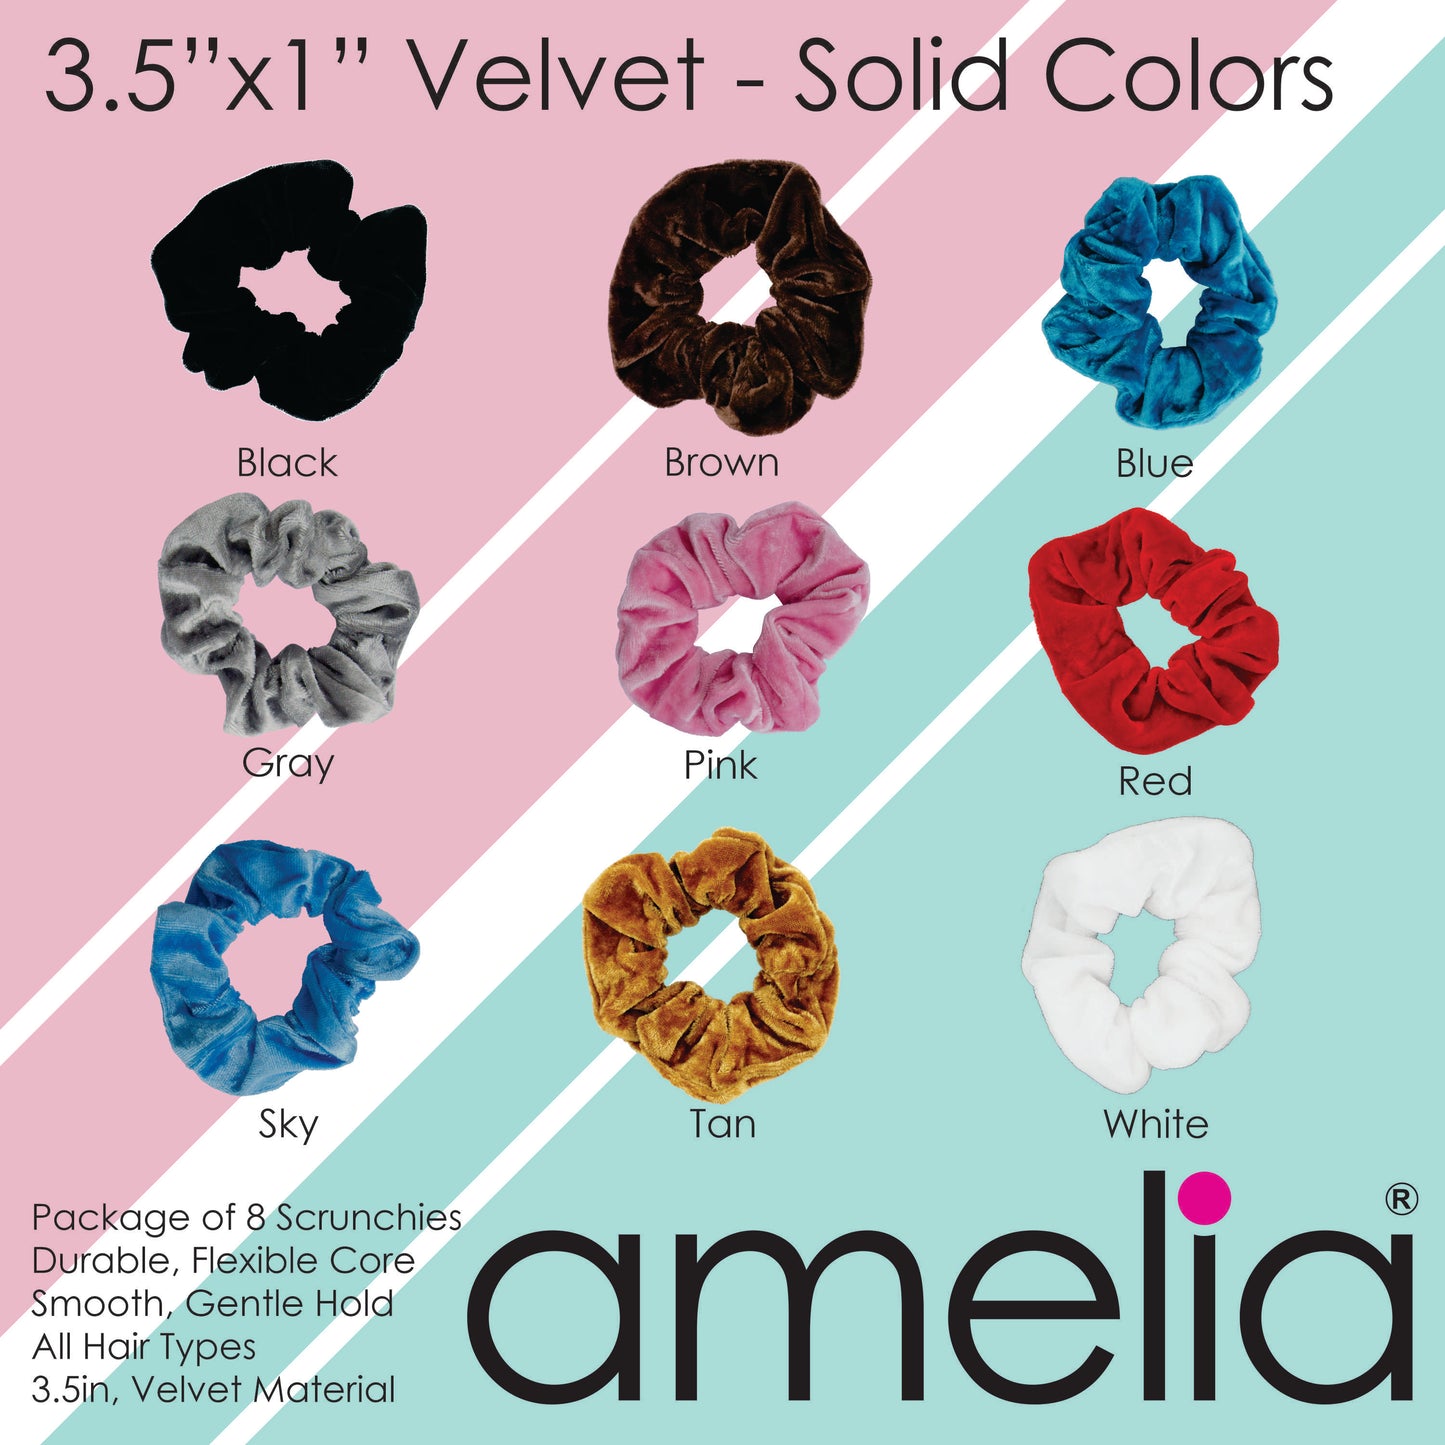 Amelia Beauty, Pastel Mix Velvet Scrunchies, 3.5in Diameter, Gentle on Hair, Strong Hold, No Snag, No Dents or Creases. 8 Pack